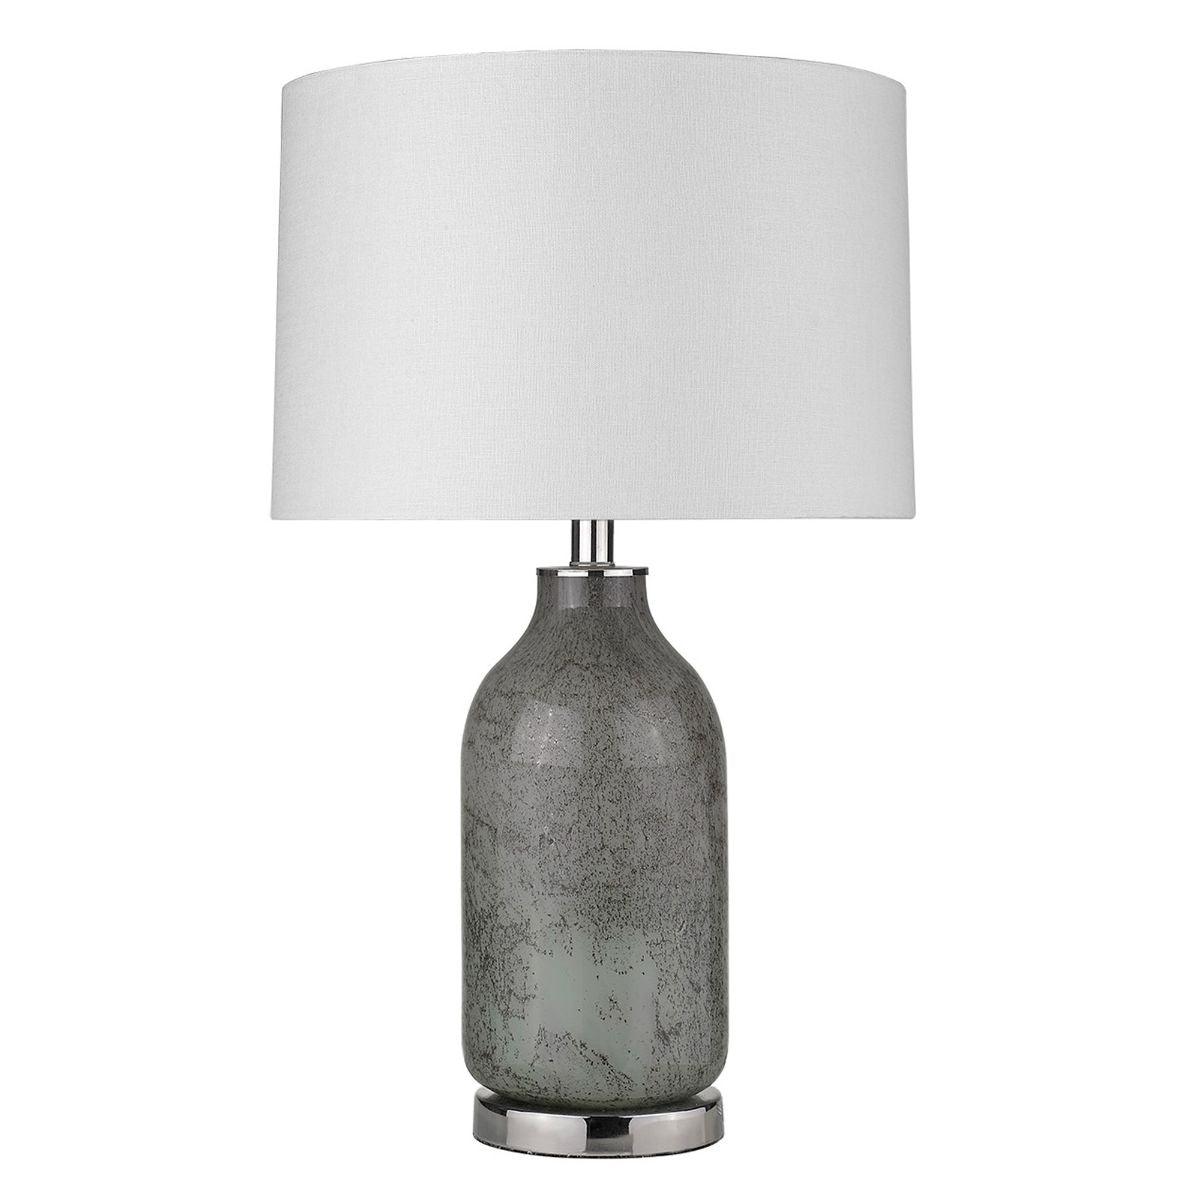 Trend Home 1 Light Table Lamp Clear Gray Glass Body and Polished Nickel Accents